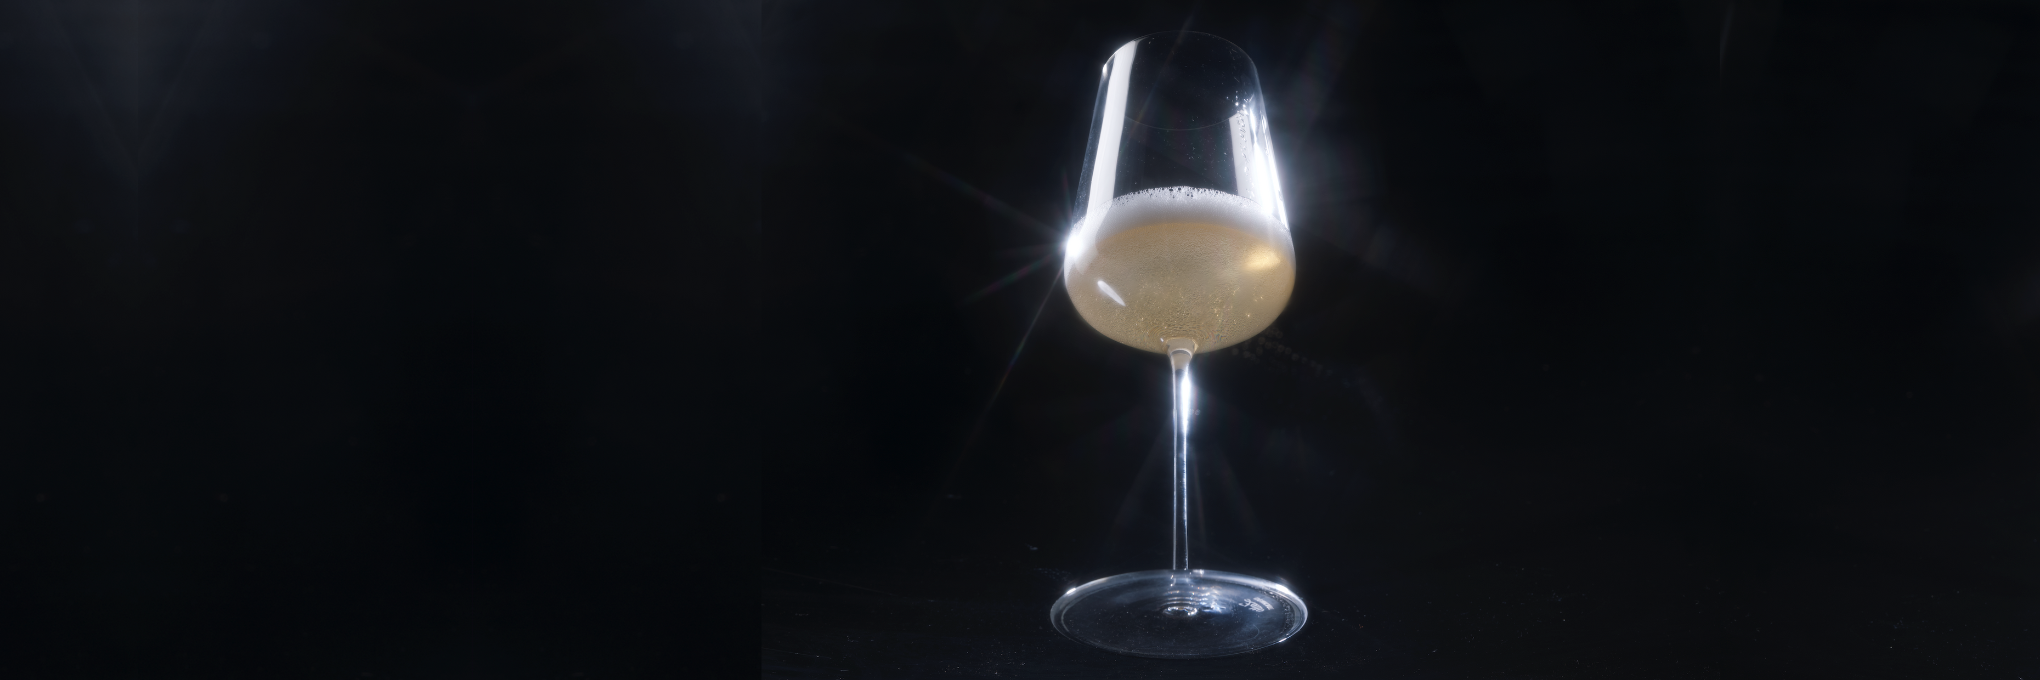 Champagne vs Sparkling Wine: What’s The Difference?